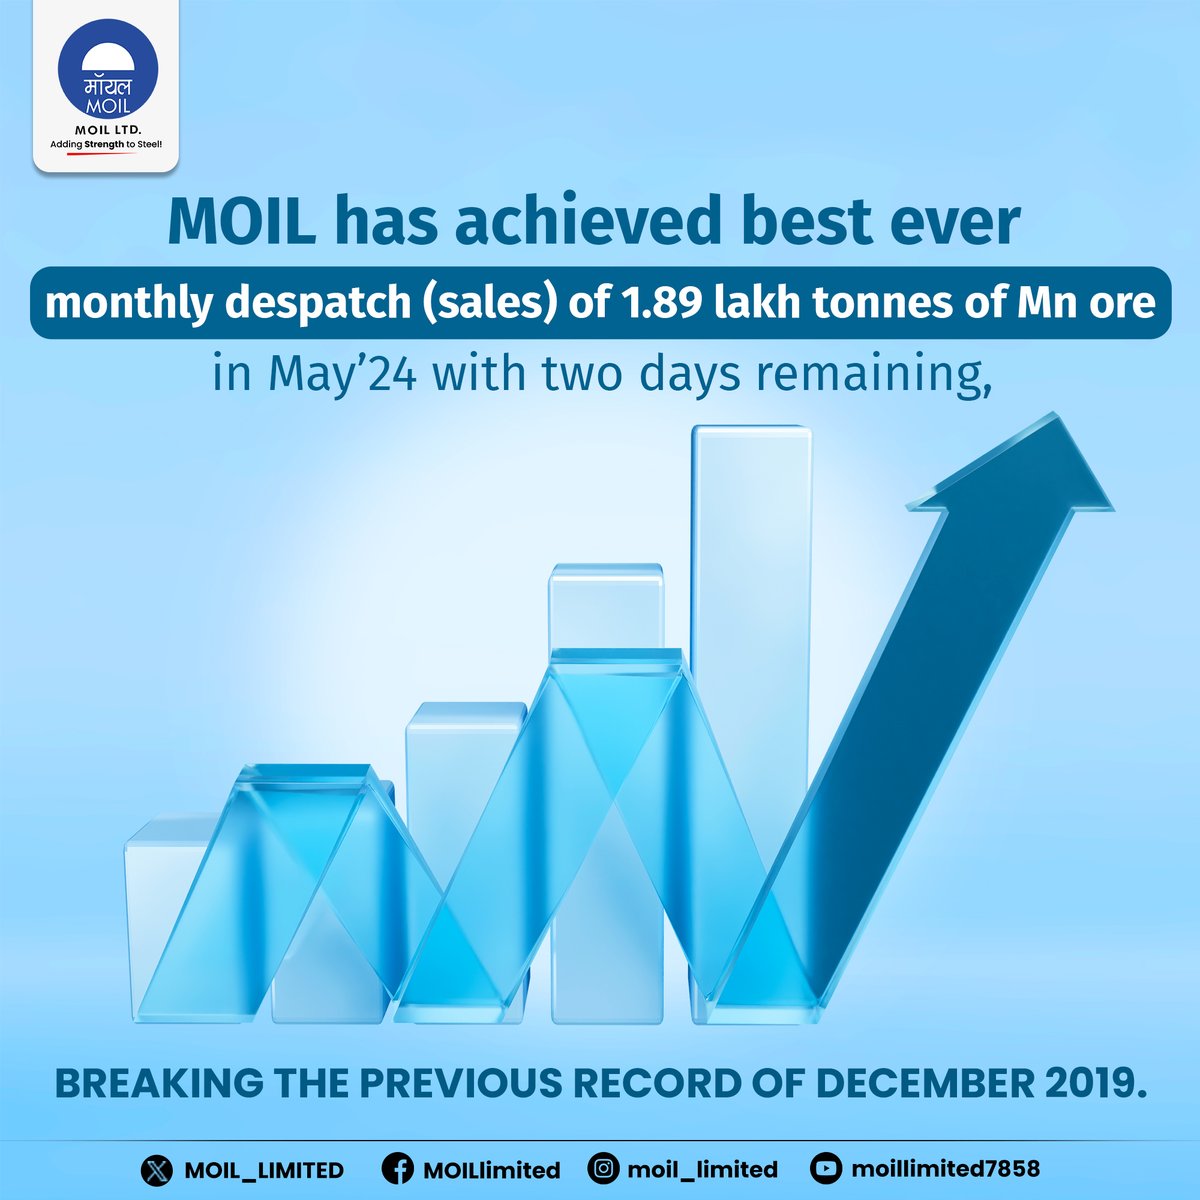 MOIL has achieved its best-ever monthly despatch (sales) of 1.89 lakh tonnes of Mn ore in May 2024, with two days remaining. This breaks the previous record set in December 2019. #MOIL #HarEkKaamDeshKeNaam #RecordBreaking #MOILMilestone #MiningIndustry #SteelIndustry #MOILUpdate